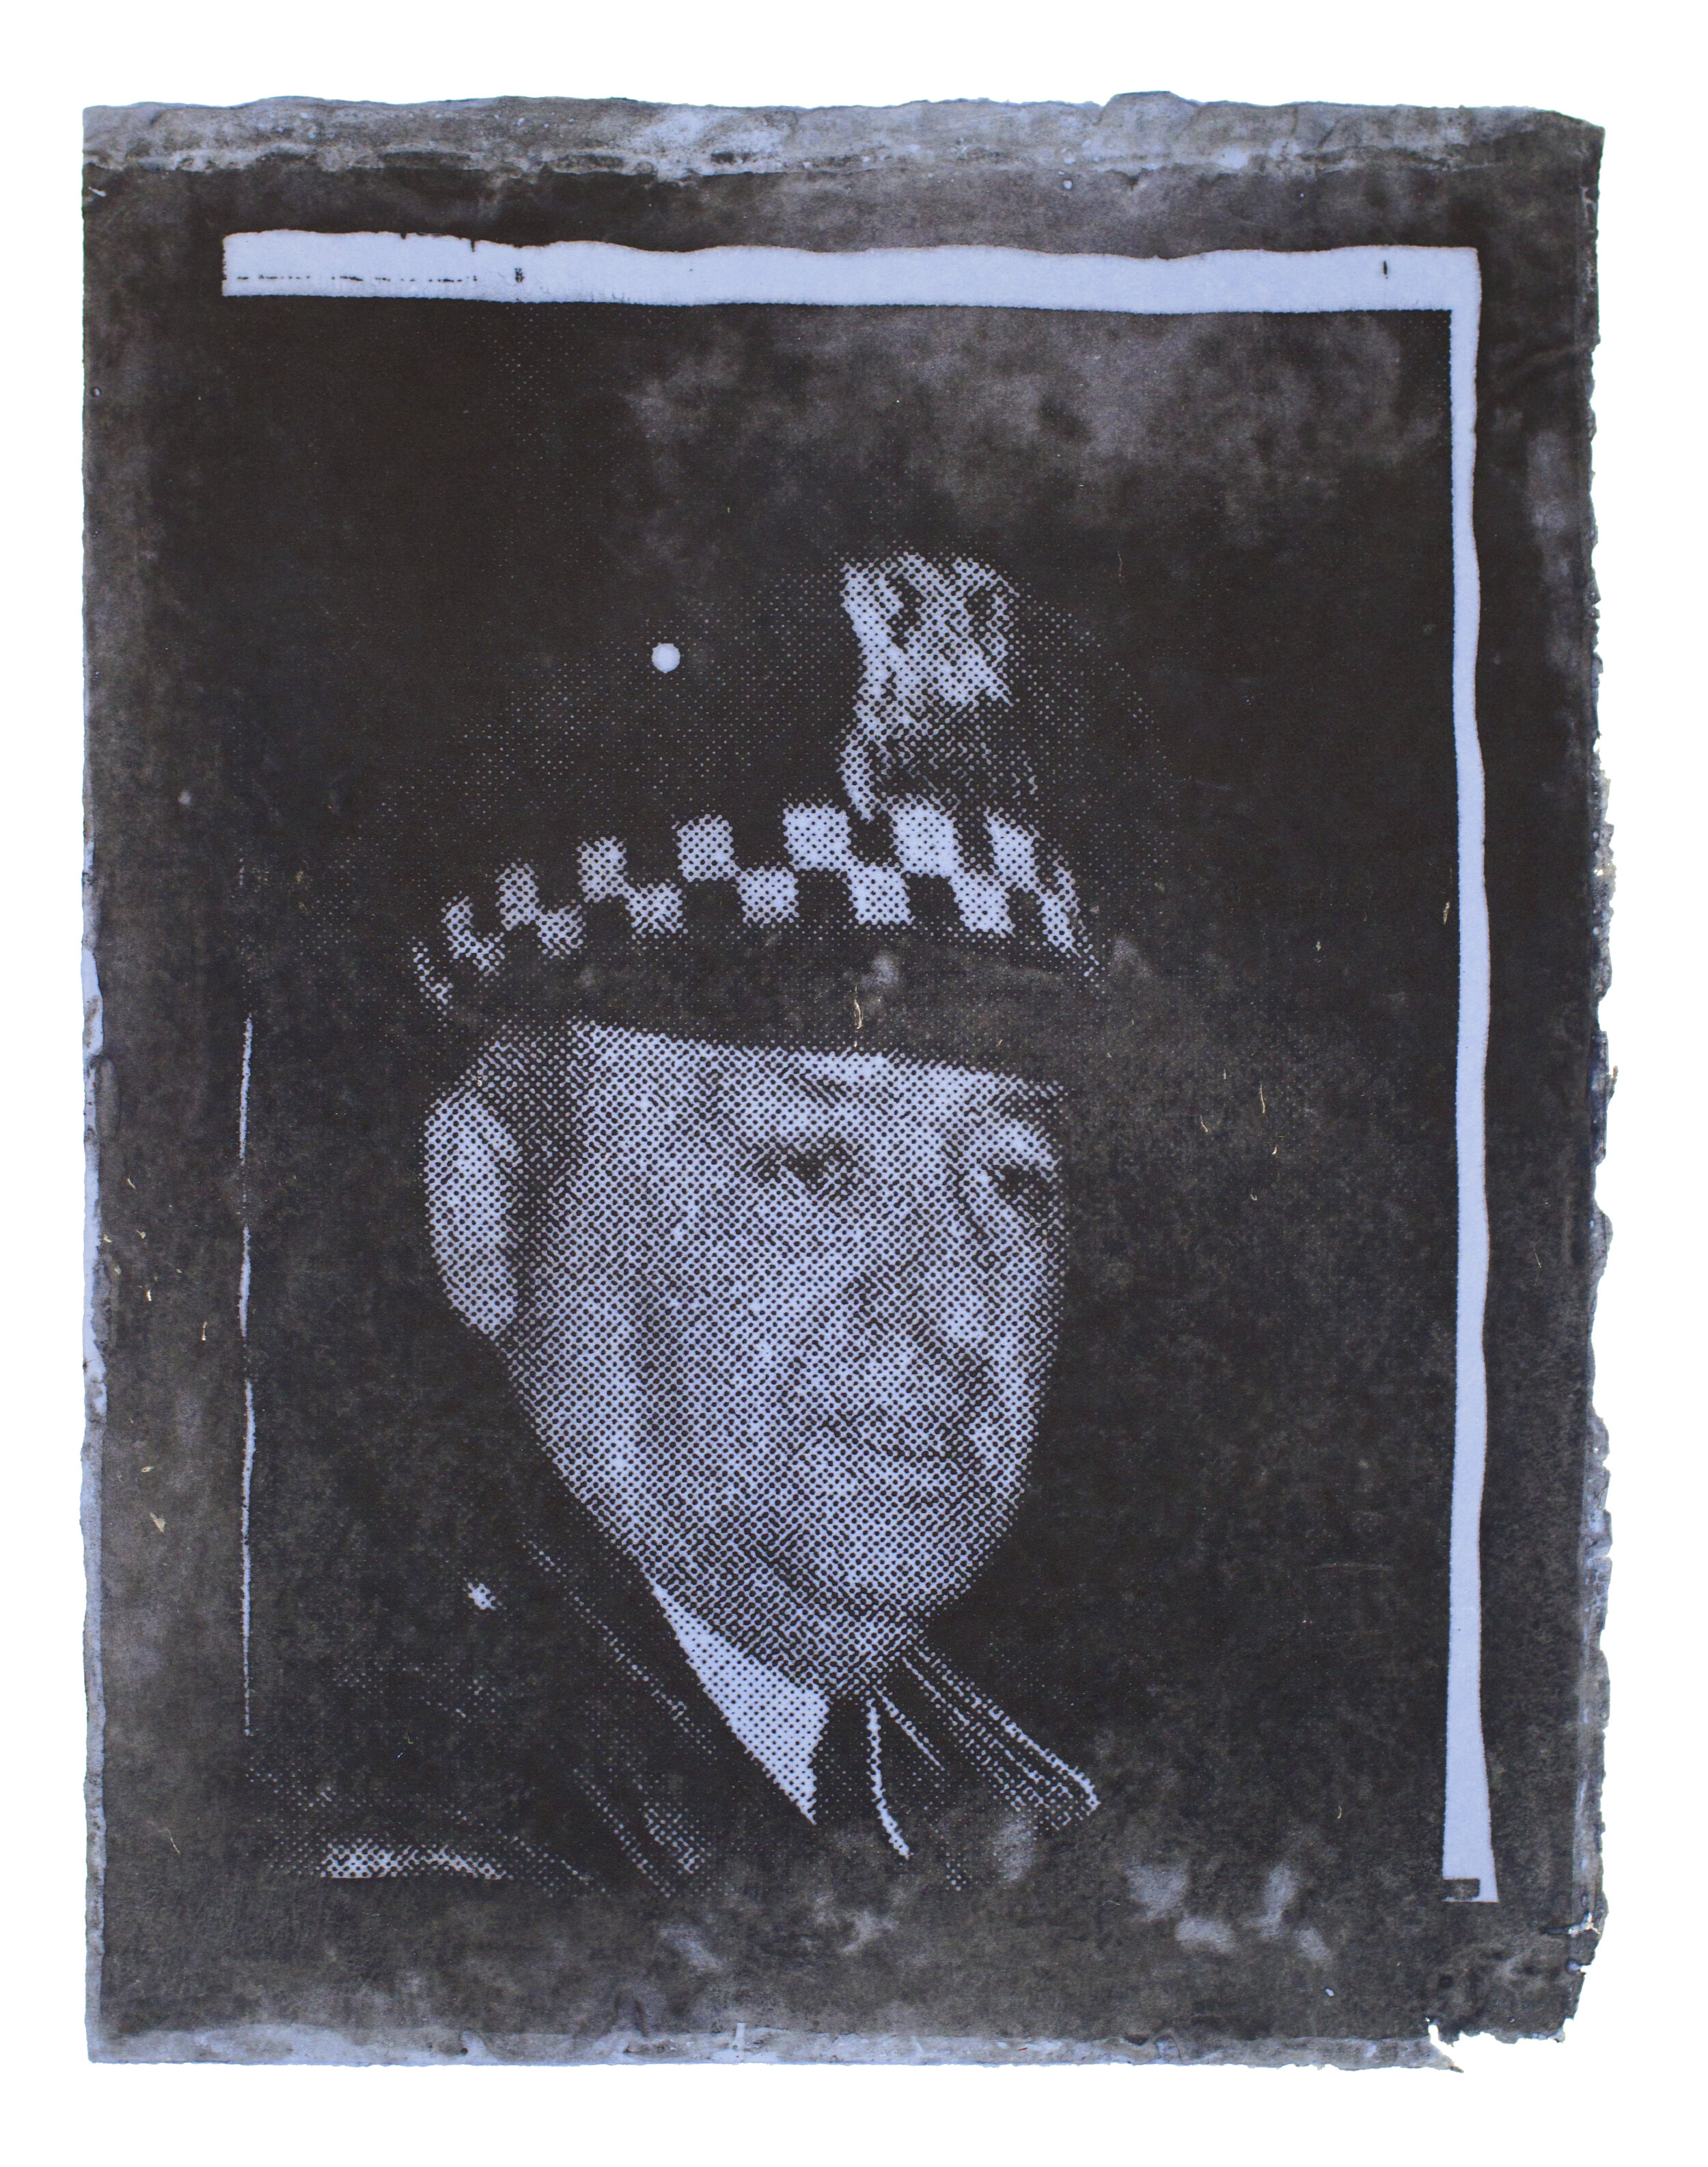   Noel W. Anderson   Cop 1   from  The Martyr Portfolio , 2018-2019 Handmade paper object (Linen pulp paint on pigmented cotton paper) 24 x 18 inches  